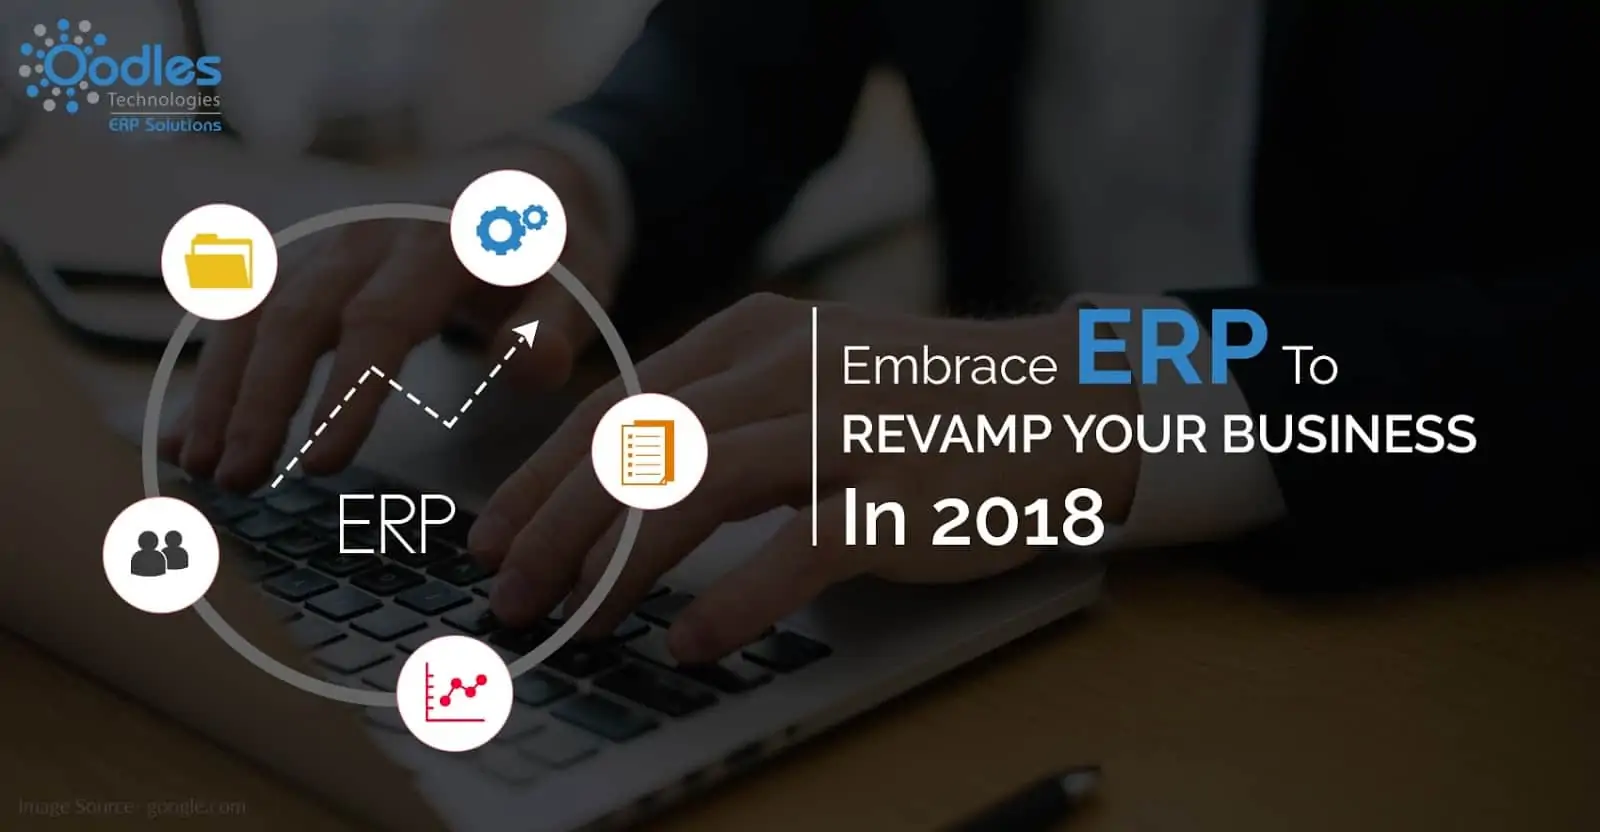 Embrace ERP For Small Businesses To Revamp Them In 2018